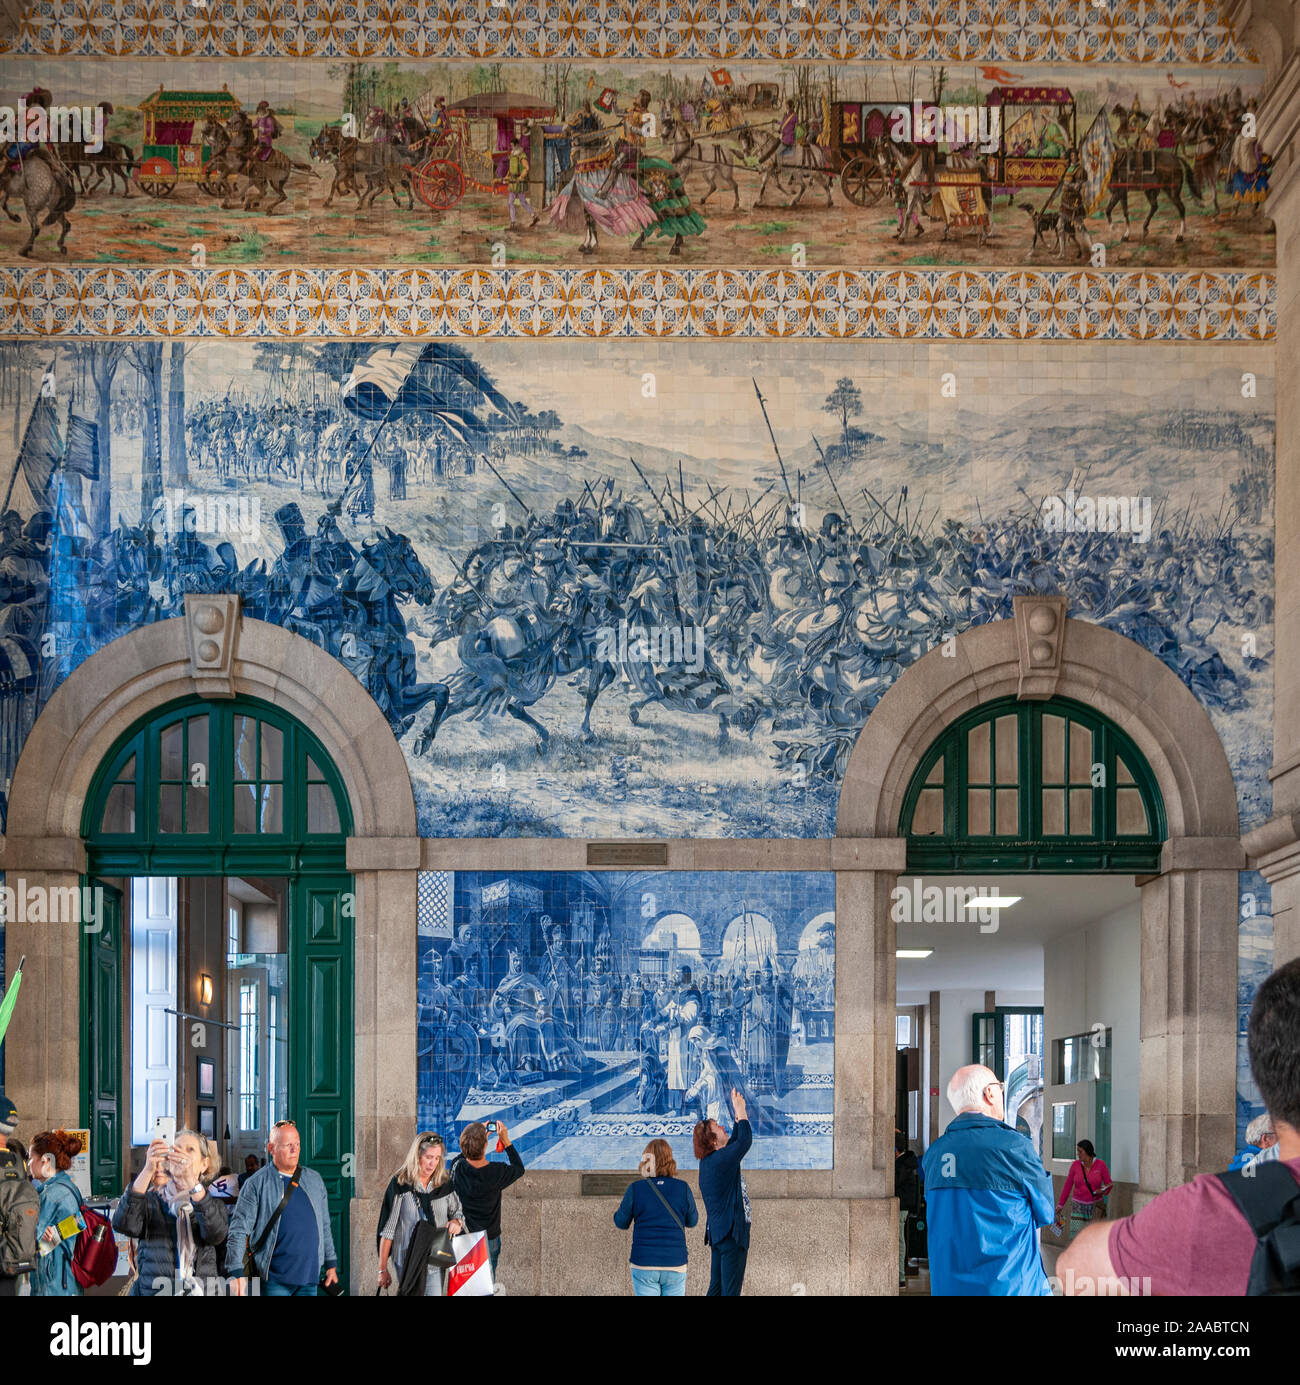 Painted ceramic tileworks (Azulejos) on the interior walls of Main hall of Sao Bento Railway Station in Porto, Portugal Stock Photo